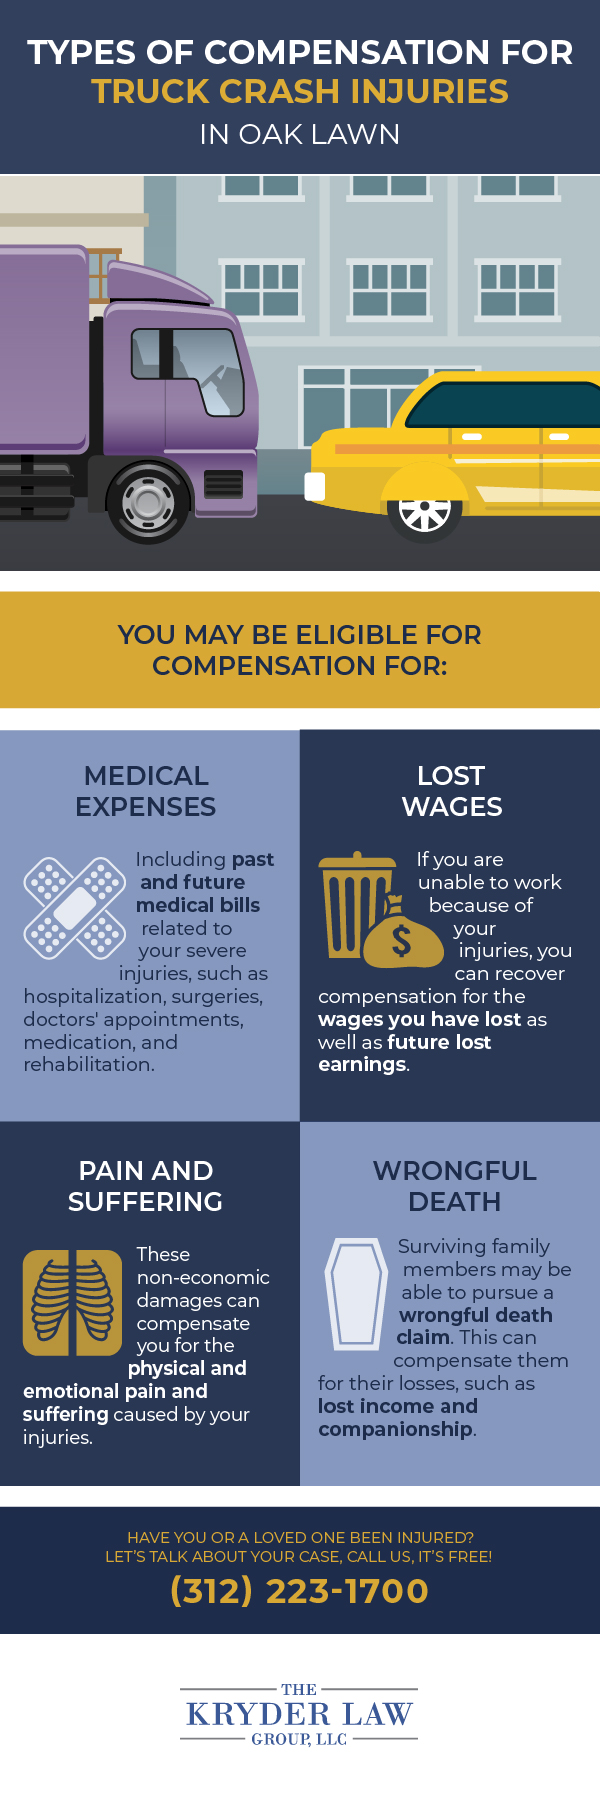 The Benefits of Hiring an Oak Lawn Truck Accident Lawyer Infographic